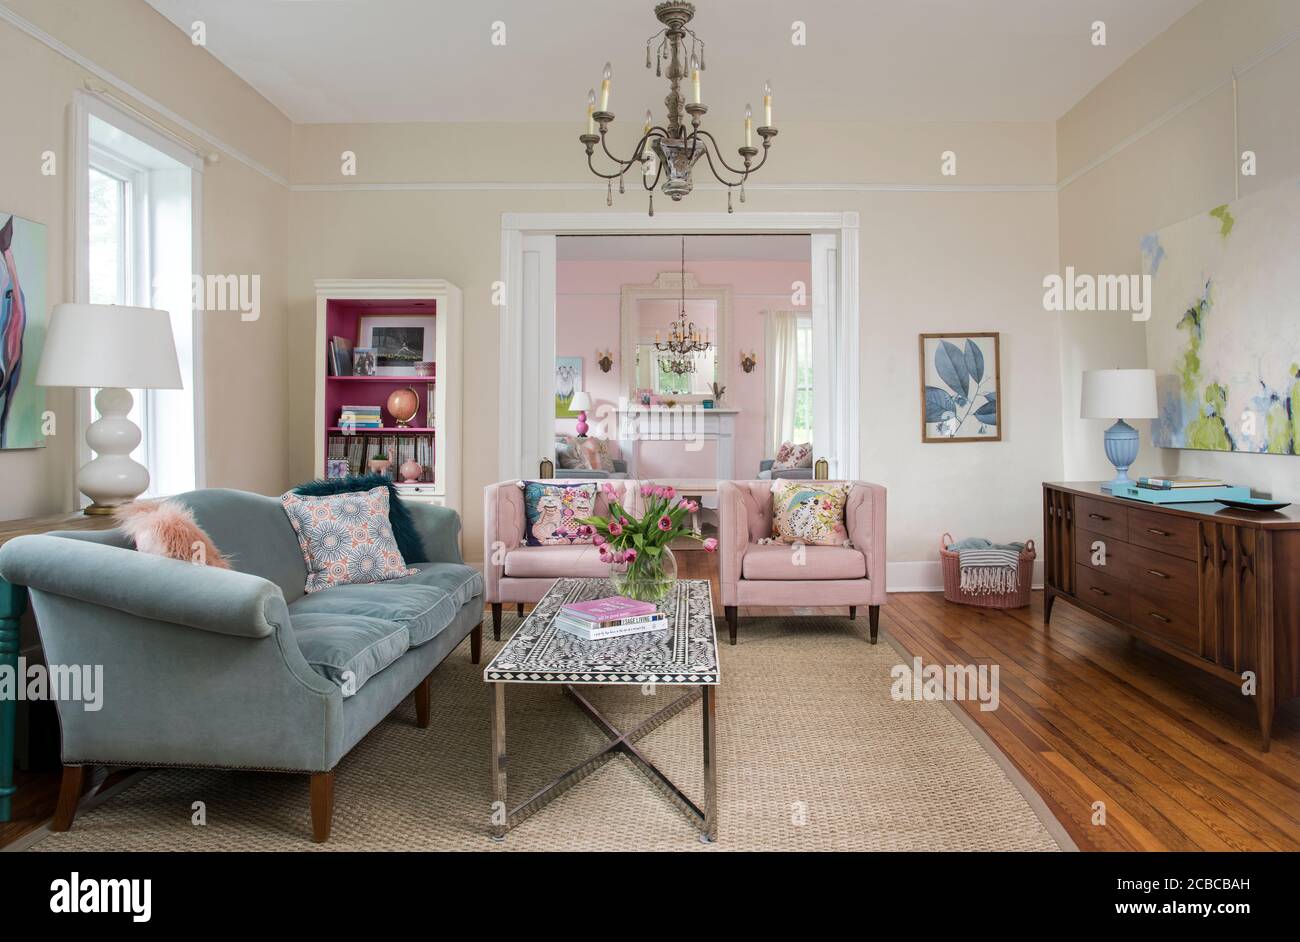 Living Rm eclectic furniture mix Stock Photo